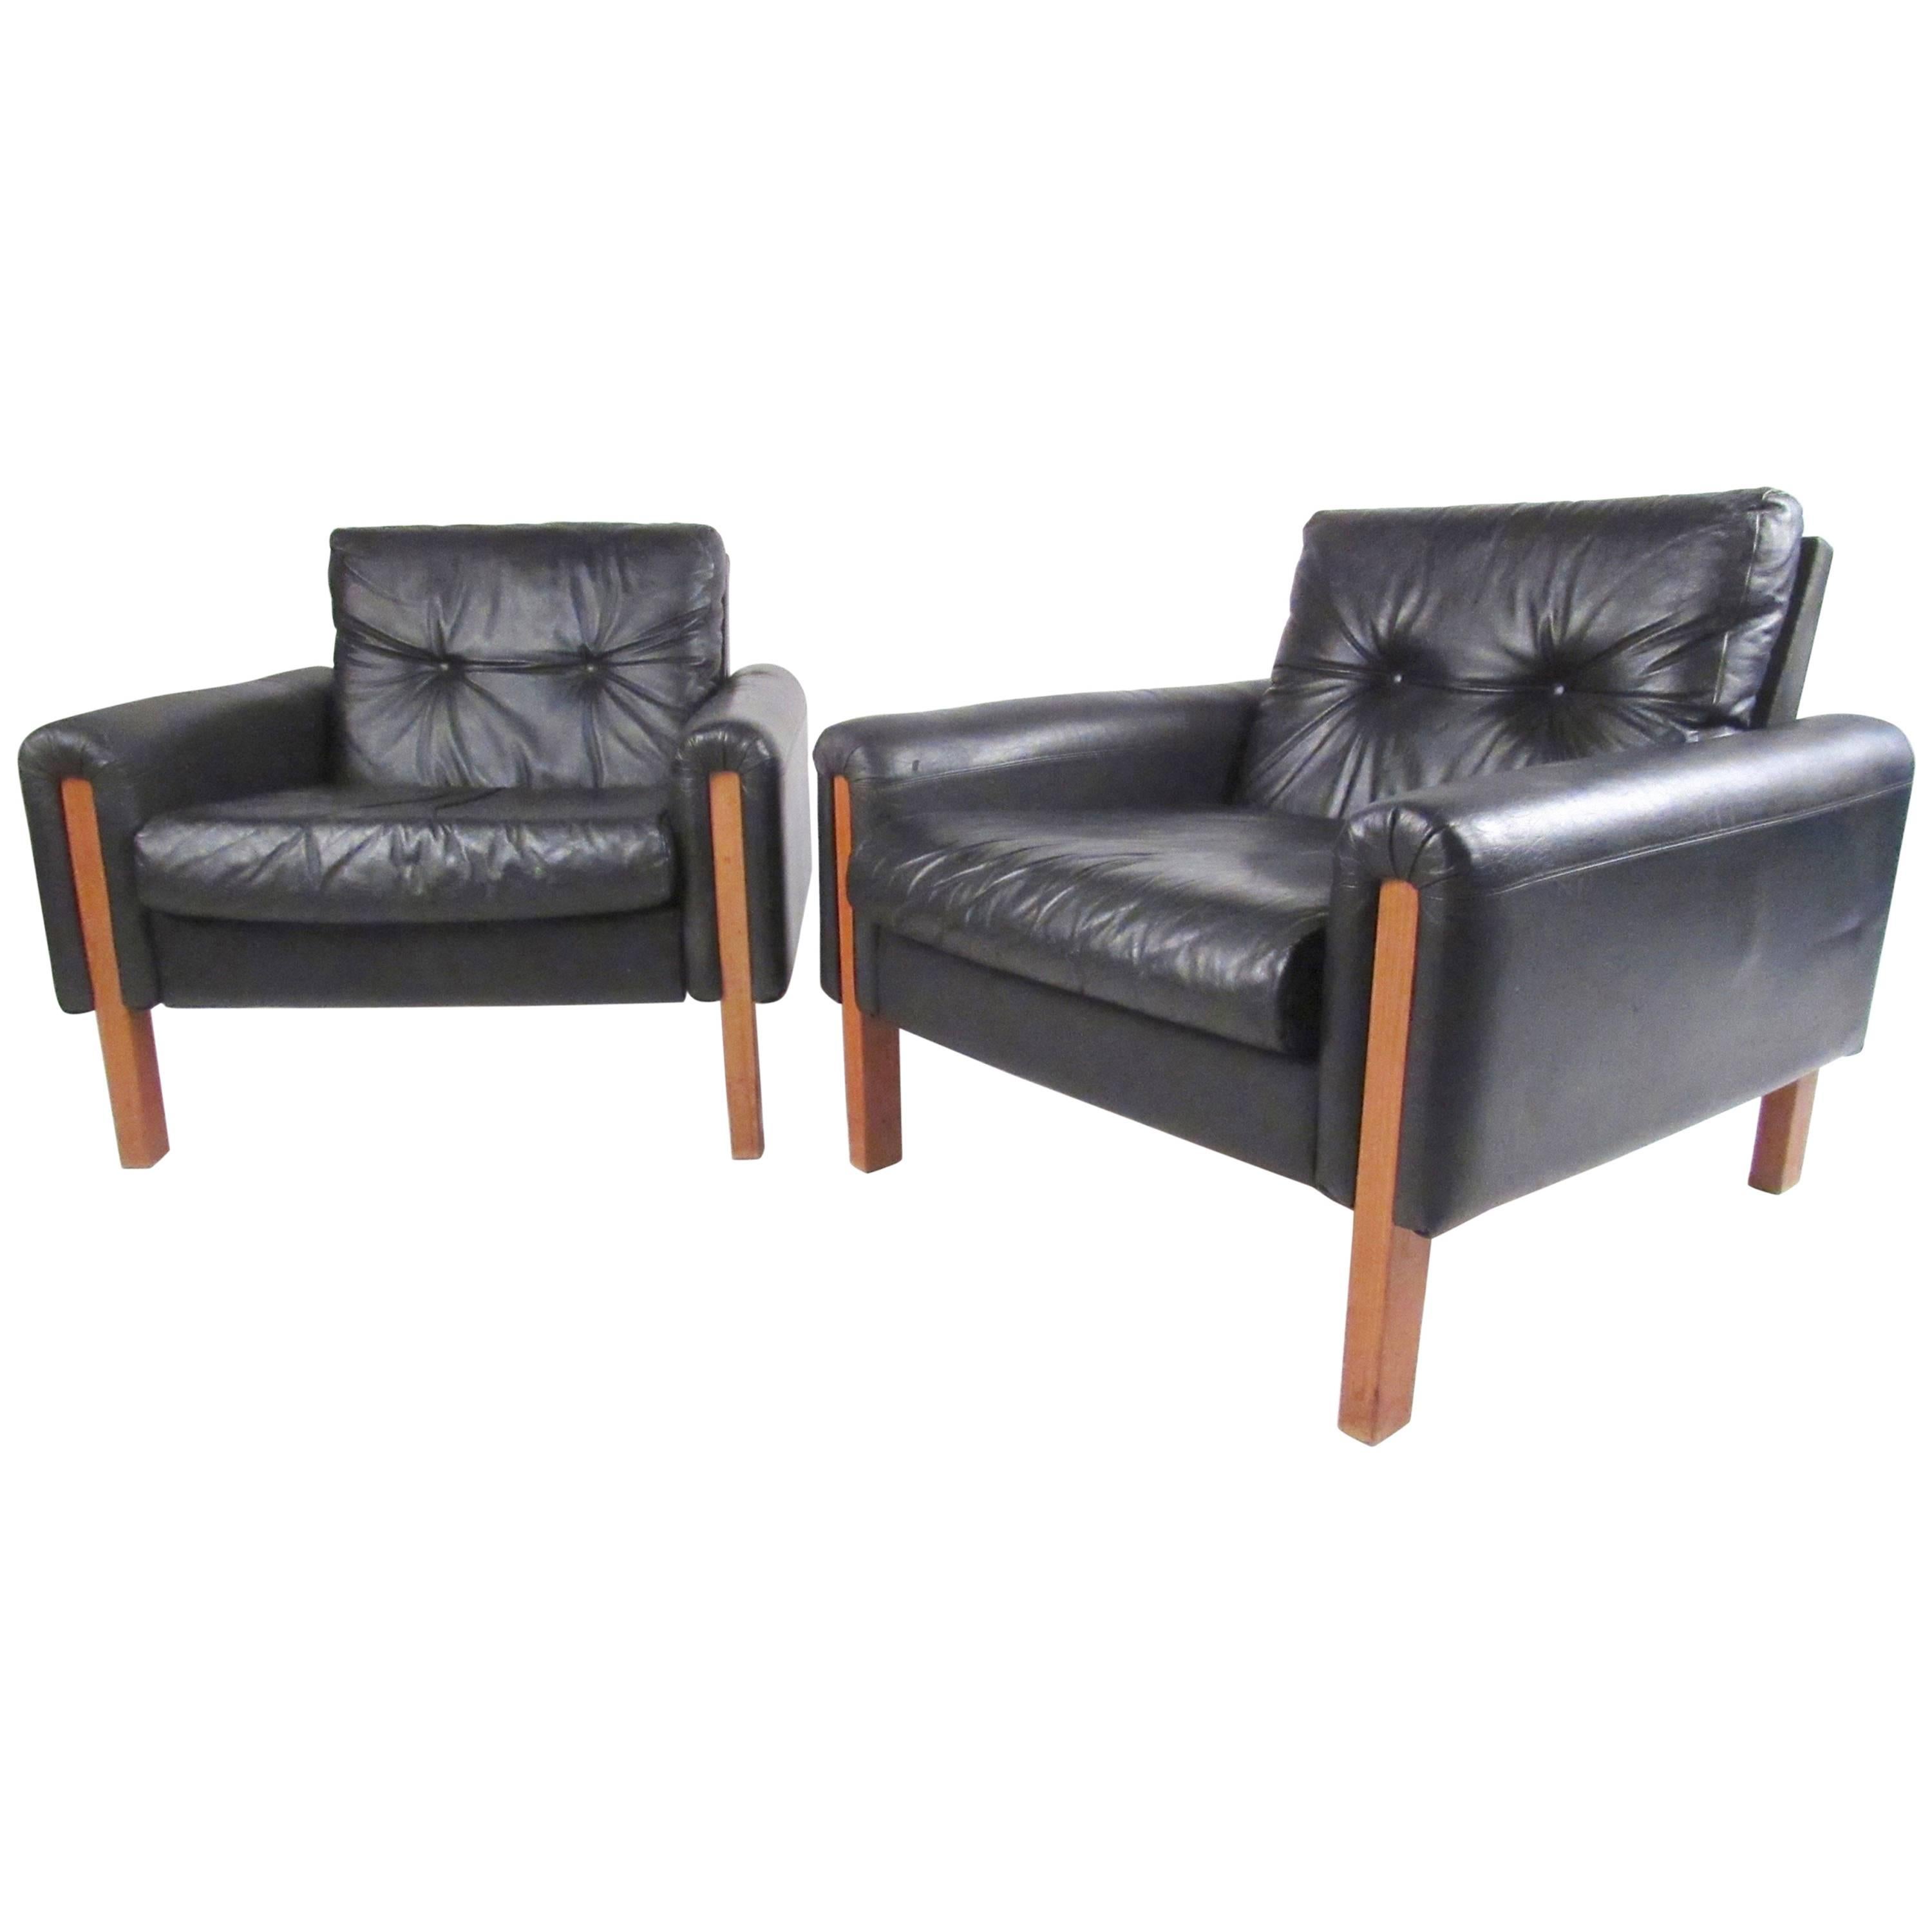 Pair of Midcentury Tufted Leather Lounge Chairs by Stendig